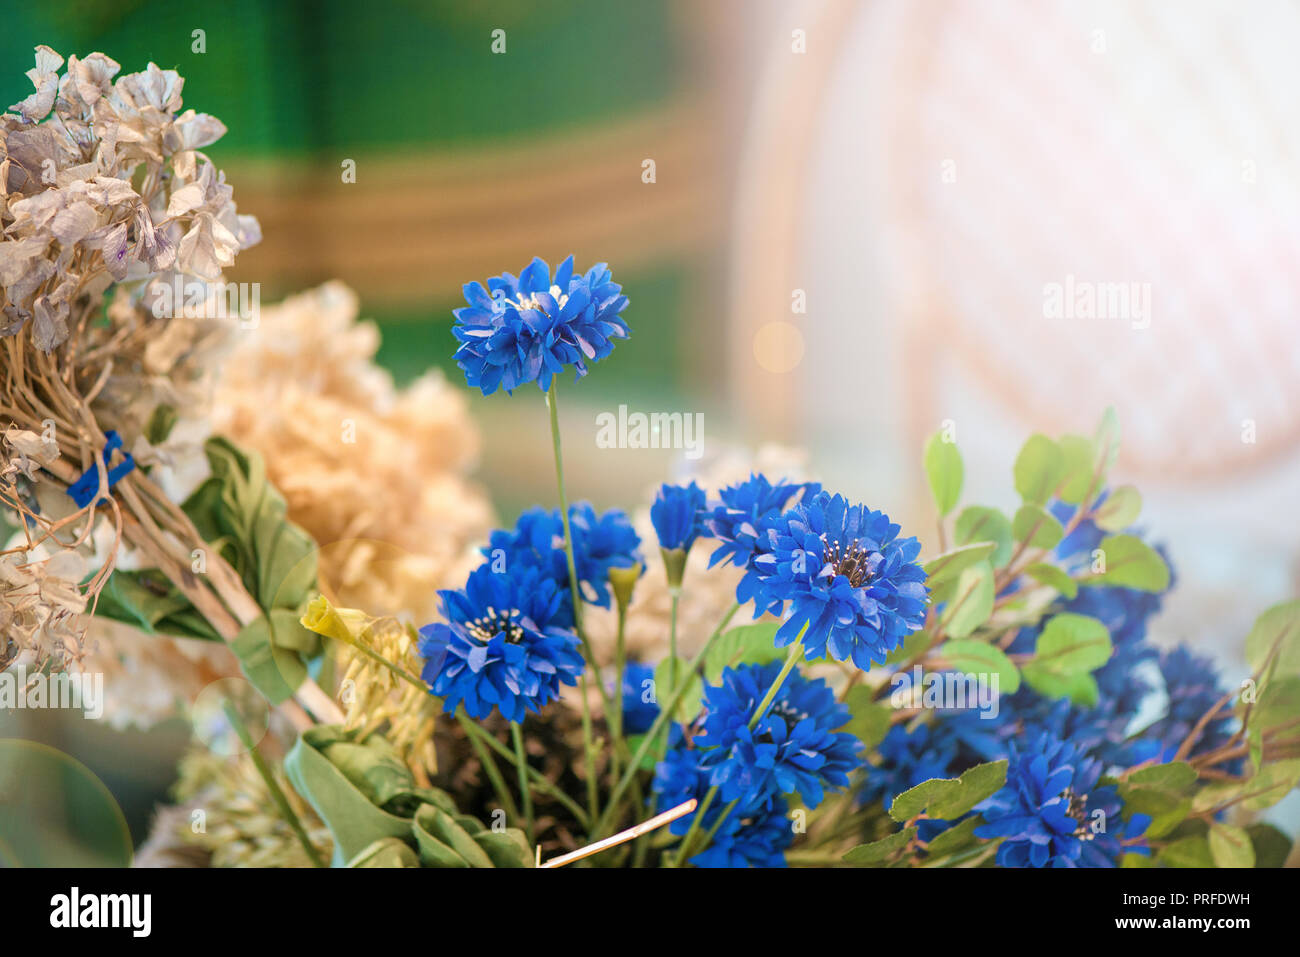 Dried blue flowers and wheat, wicker chairs in dining room with big glass  table and decorations. Cozy, vintage, rustic atmosphere at home. Concept of  Stock Photo - Alamy